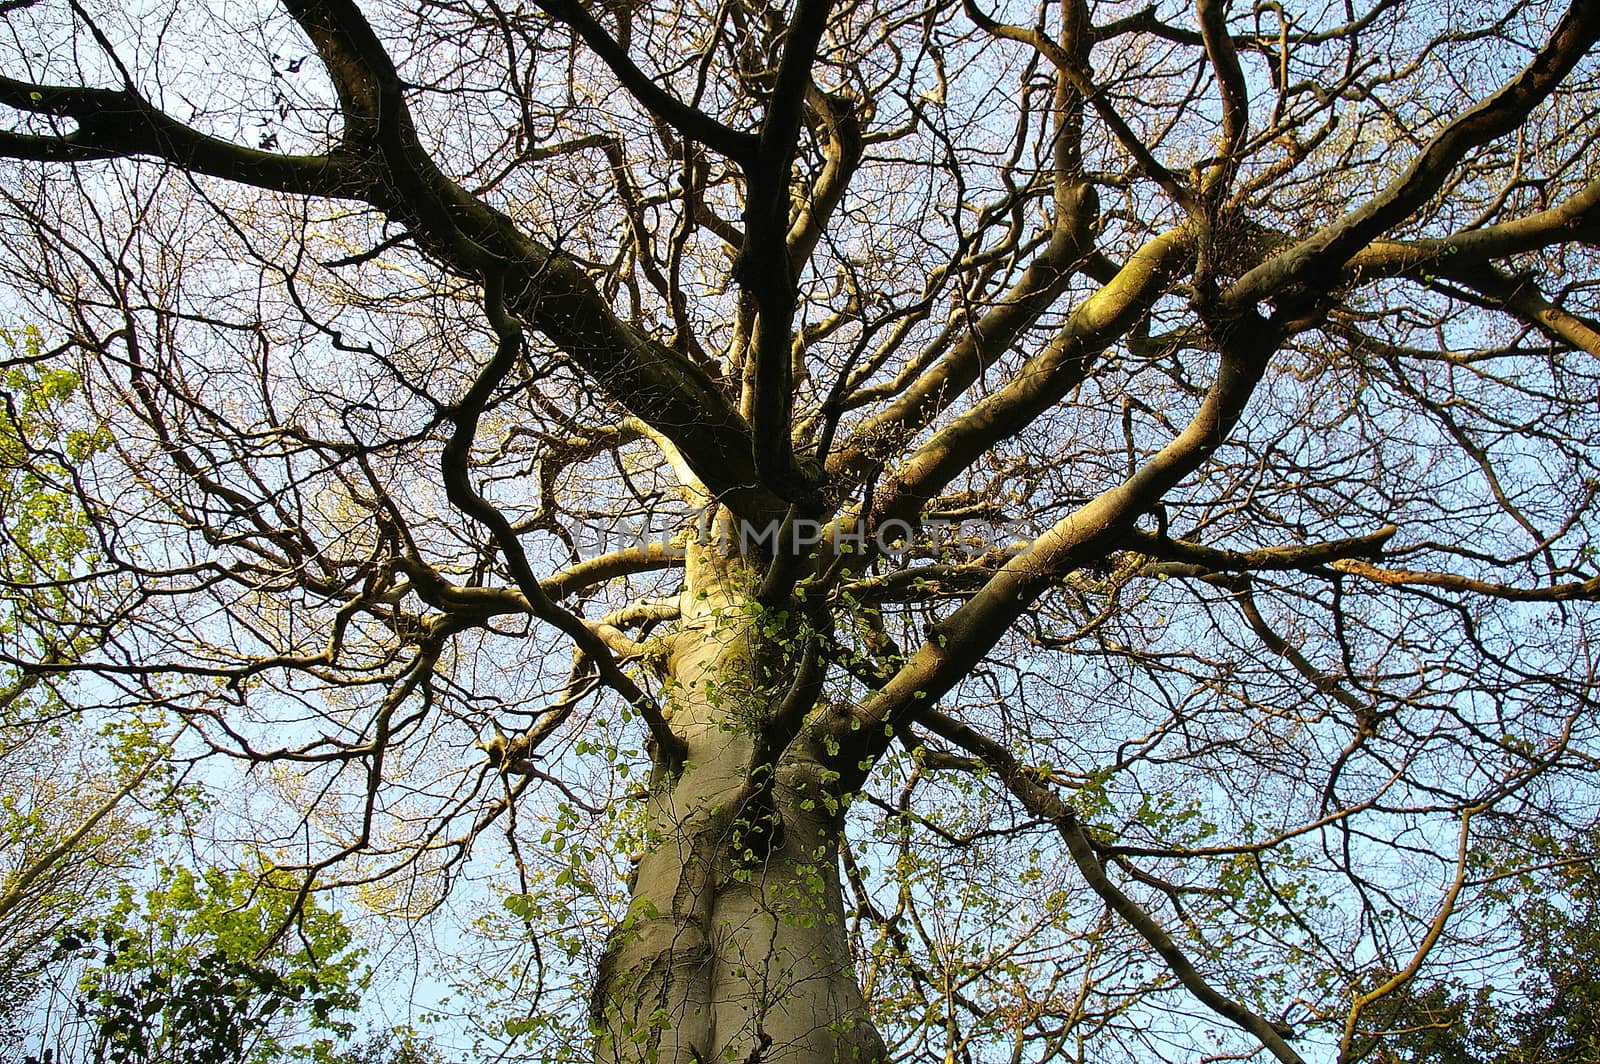 The impenetrable branches of a tree with branches radiating from the trunk